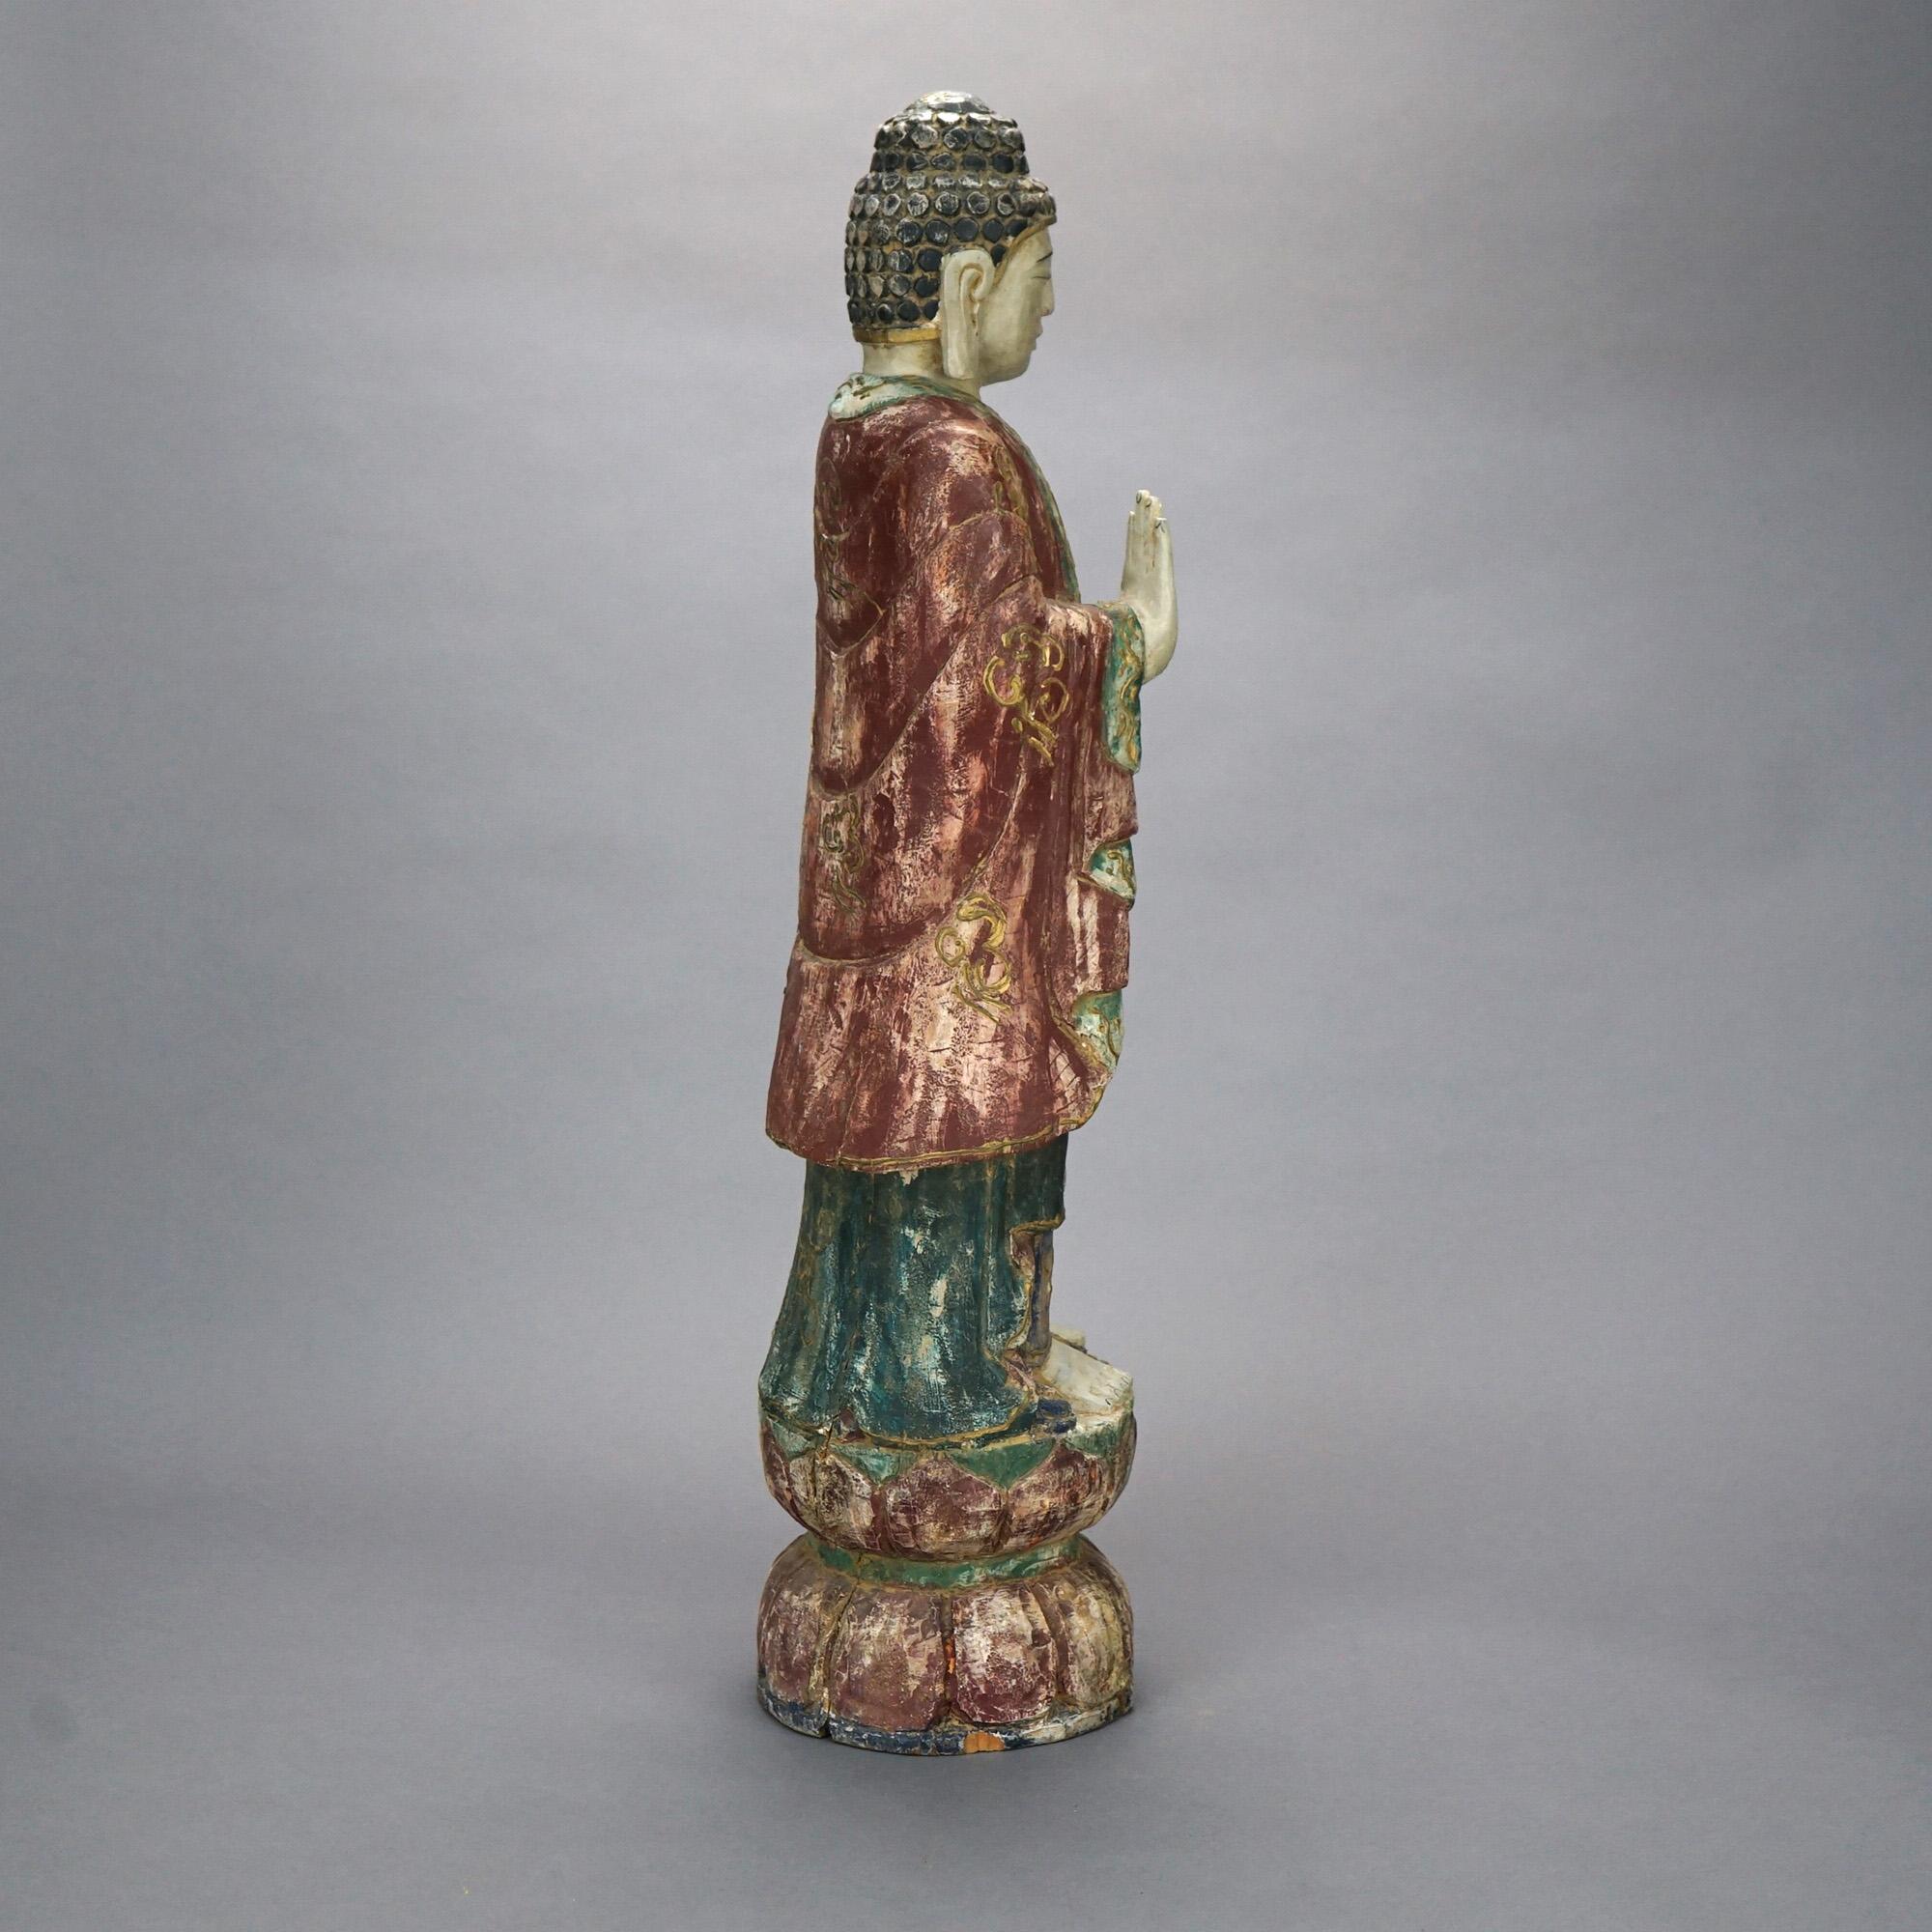 Antique Polychromed Carved Wood Buddha Figure 20th C In Good Condition For Sale In Big Flats, NY